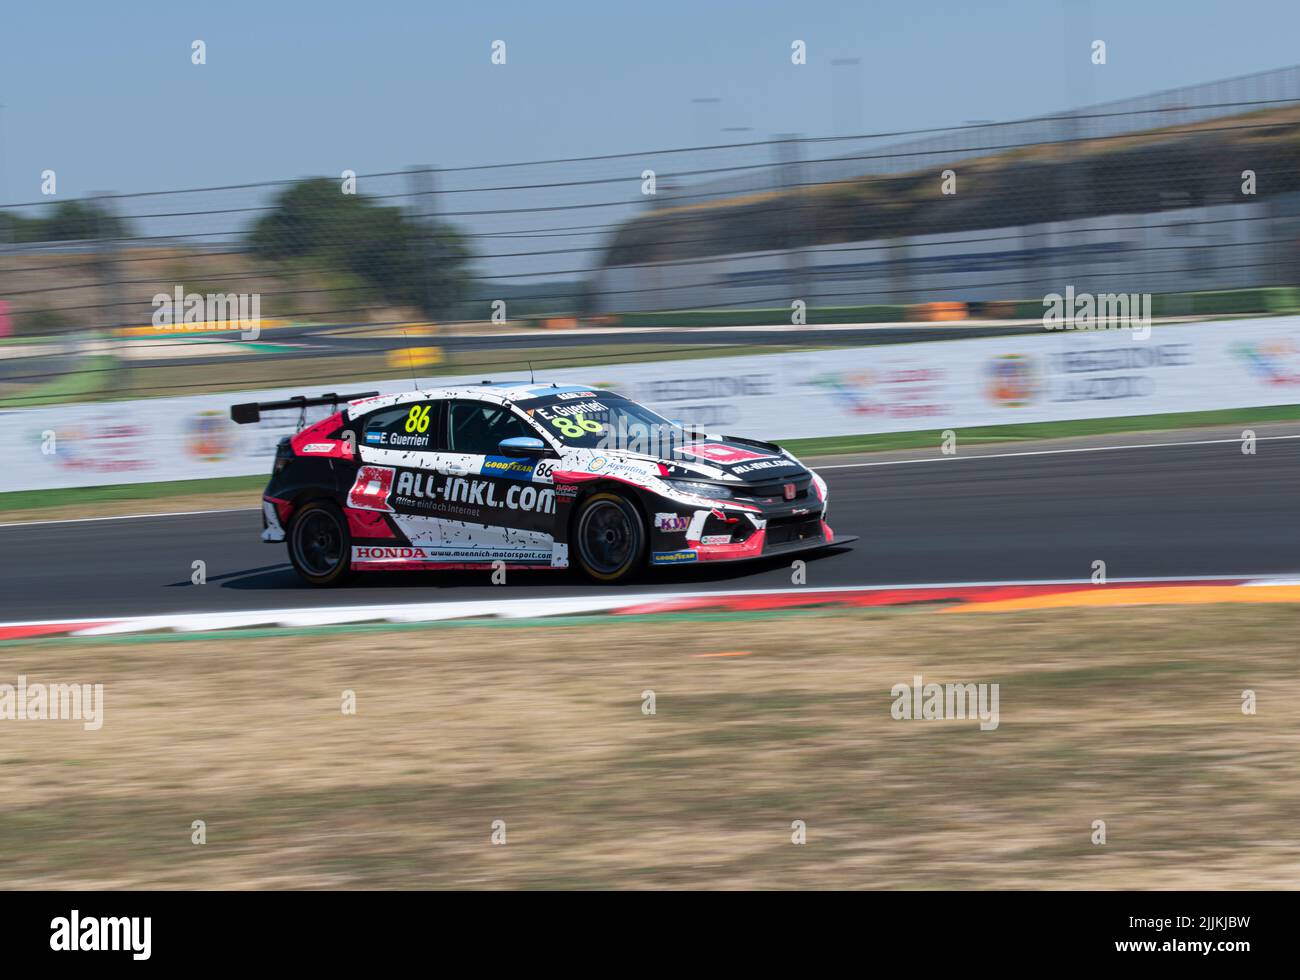 Racing Honda TCR car action on racetrack, blurred motion background. Vallelunga, Italy, july 24 2022, Race of Italy Stock Photo